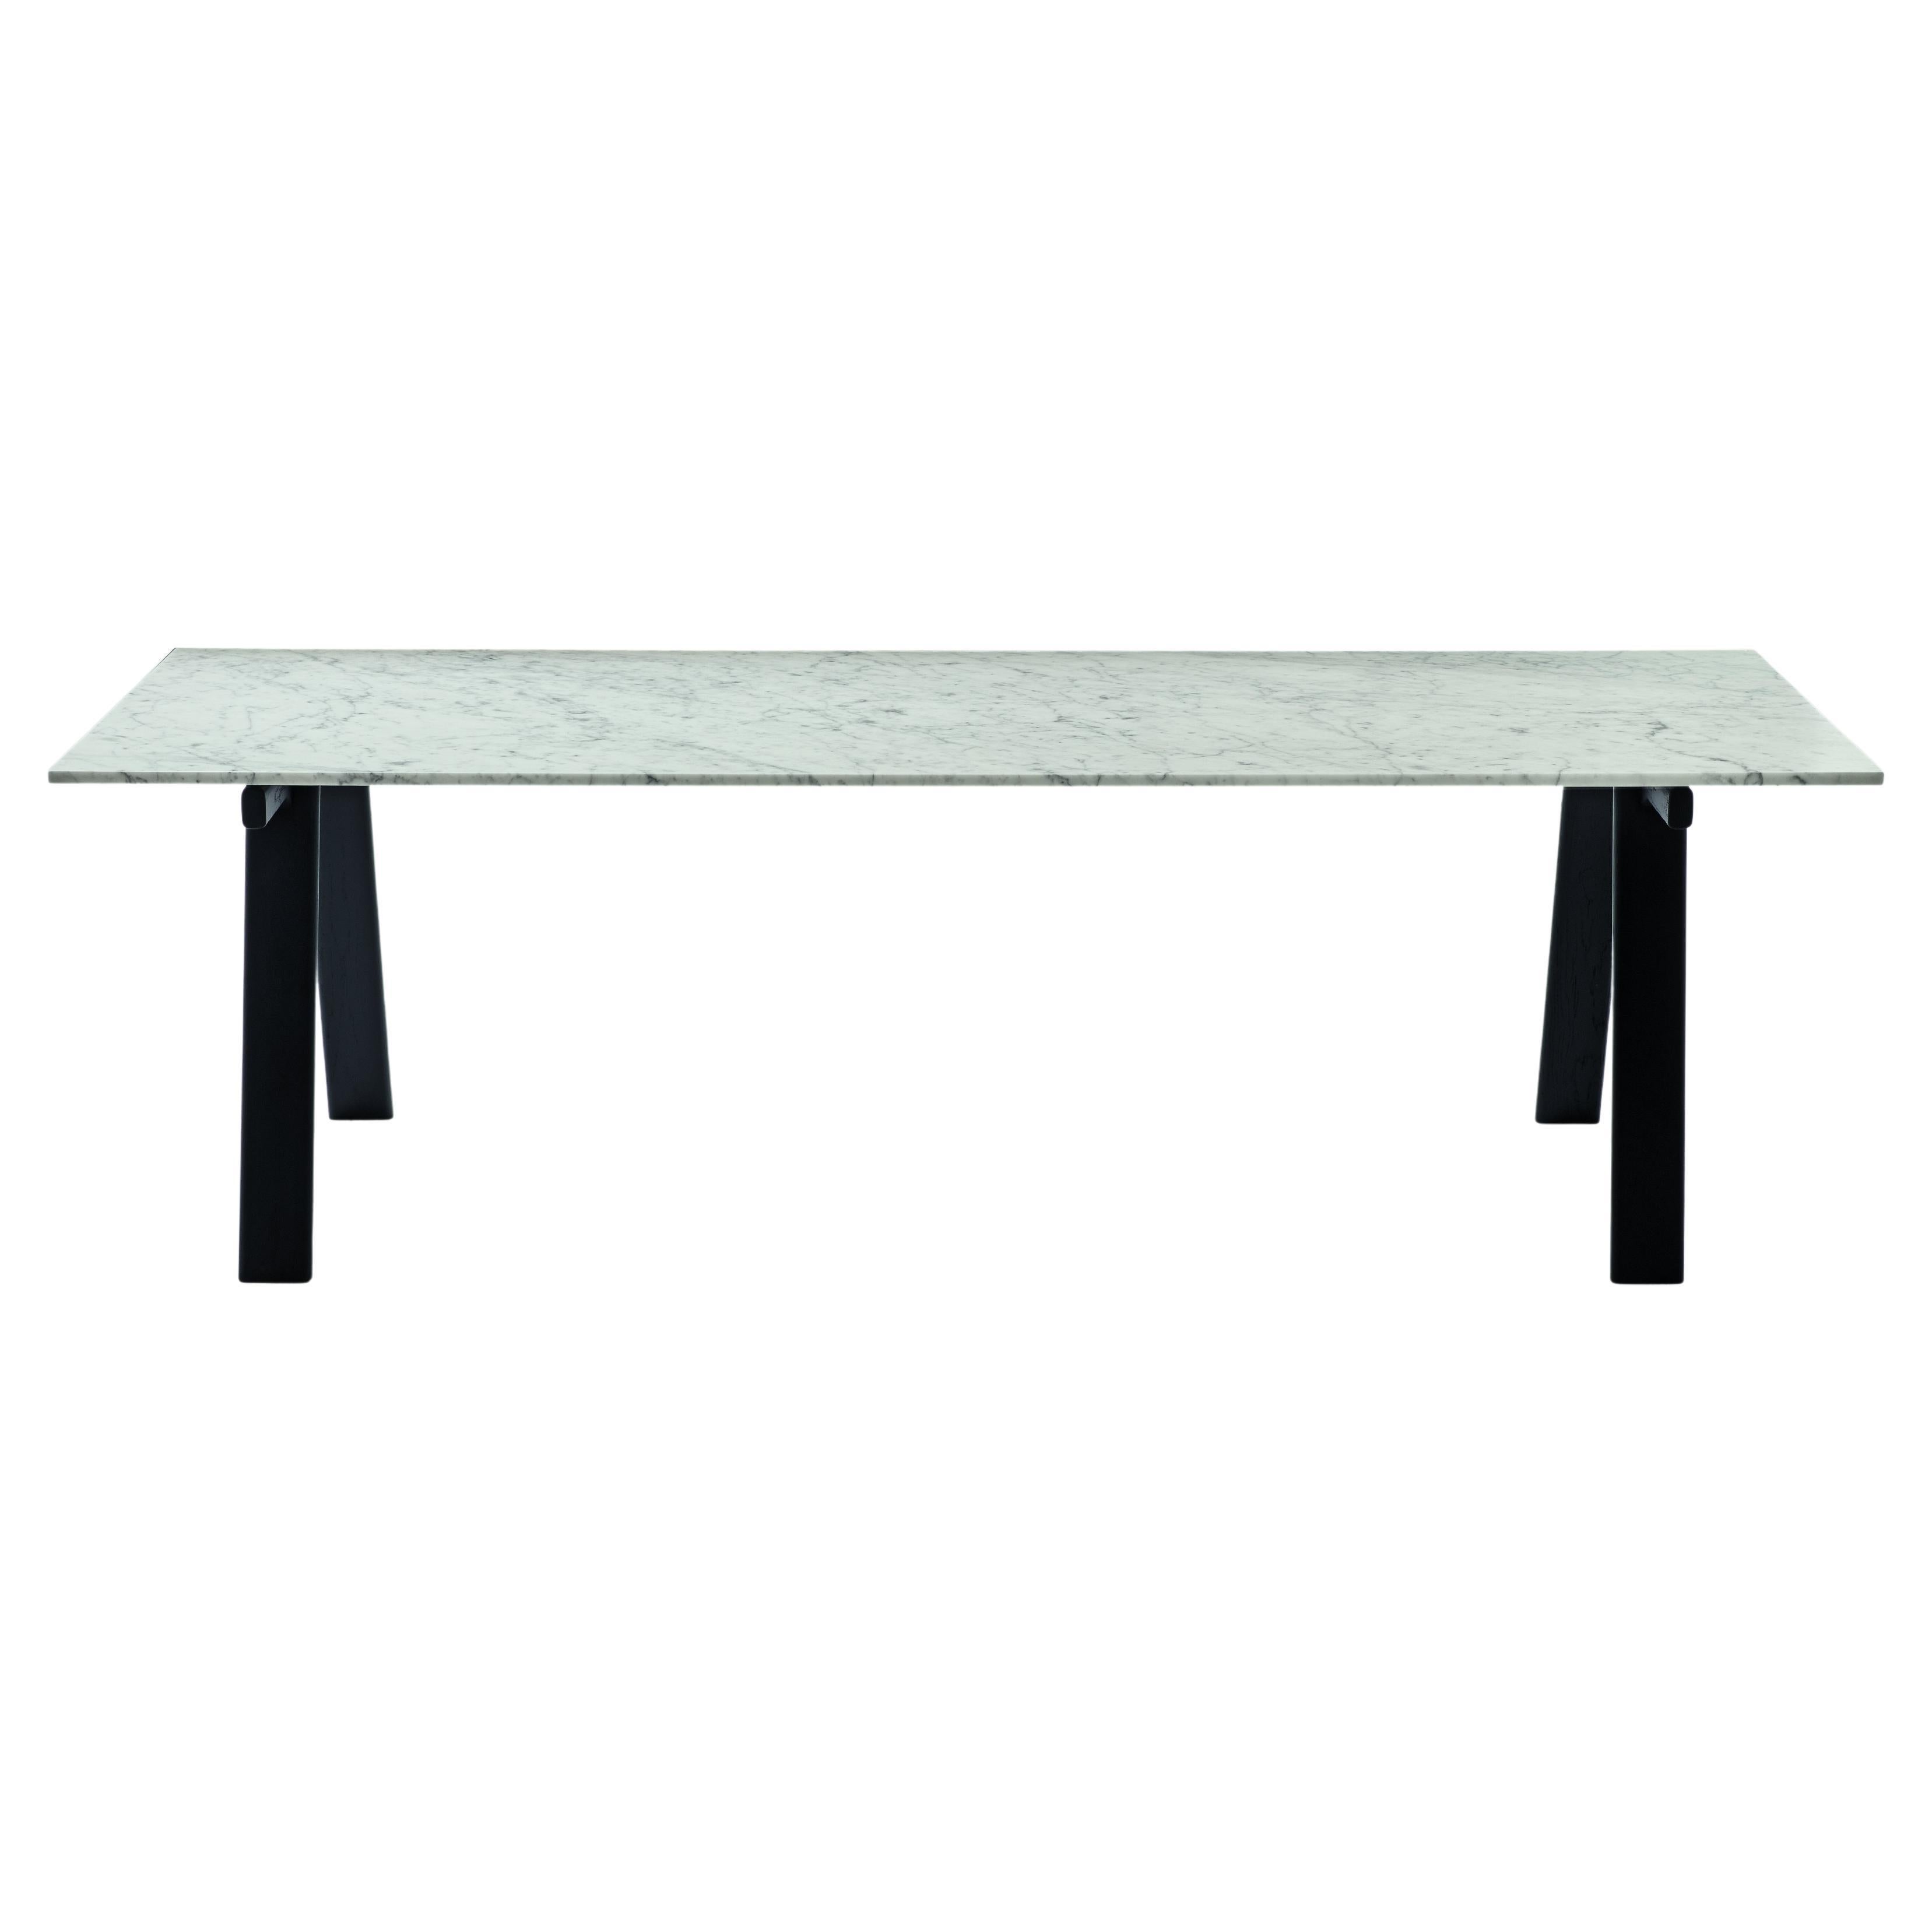 Zanotta Small Ambrosiano Table in Carrara Marble Top with Black Frame by Mist-o